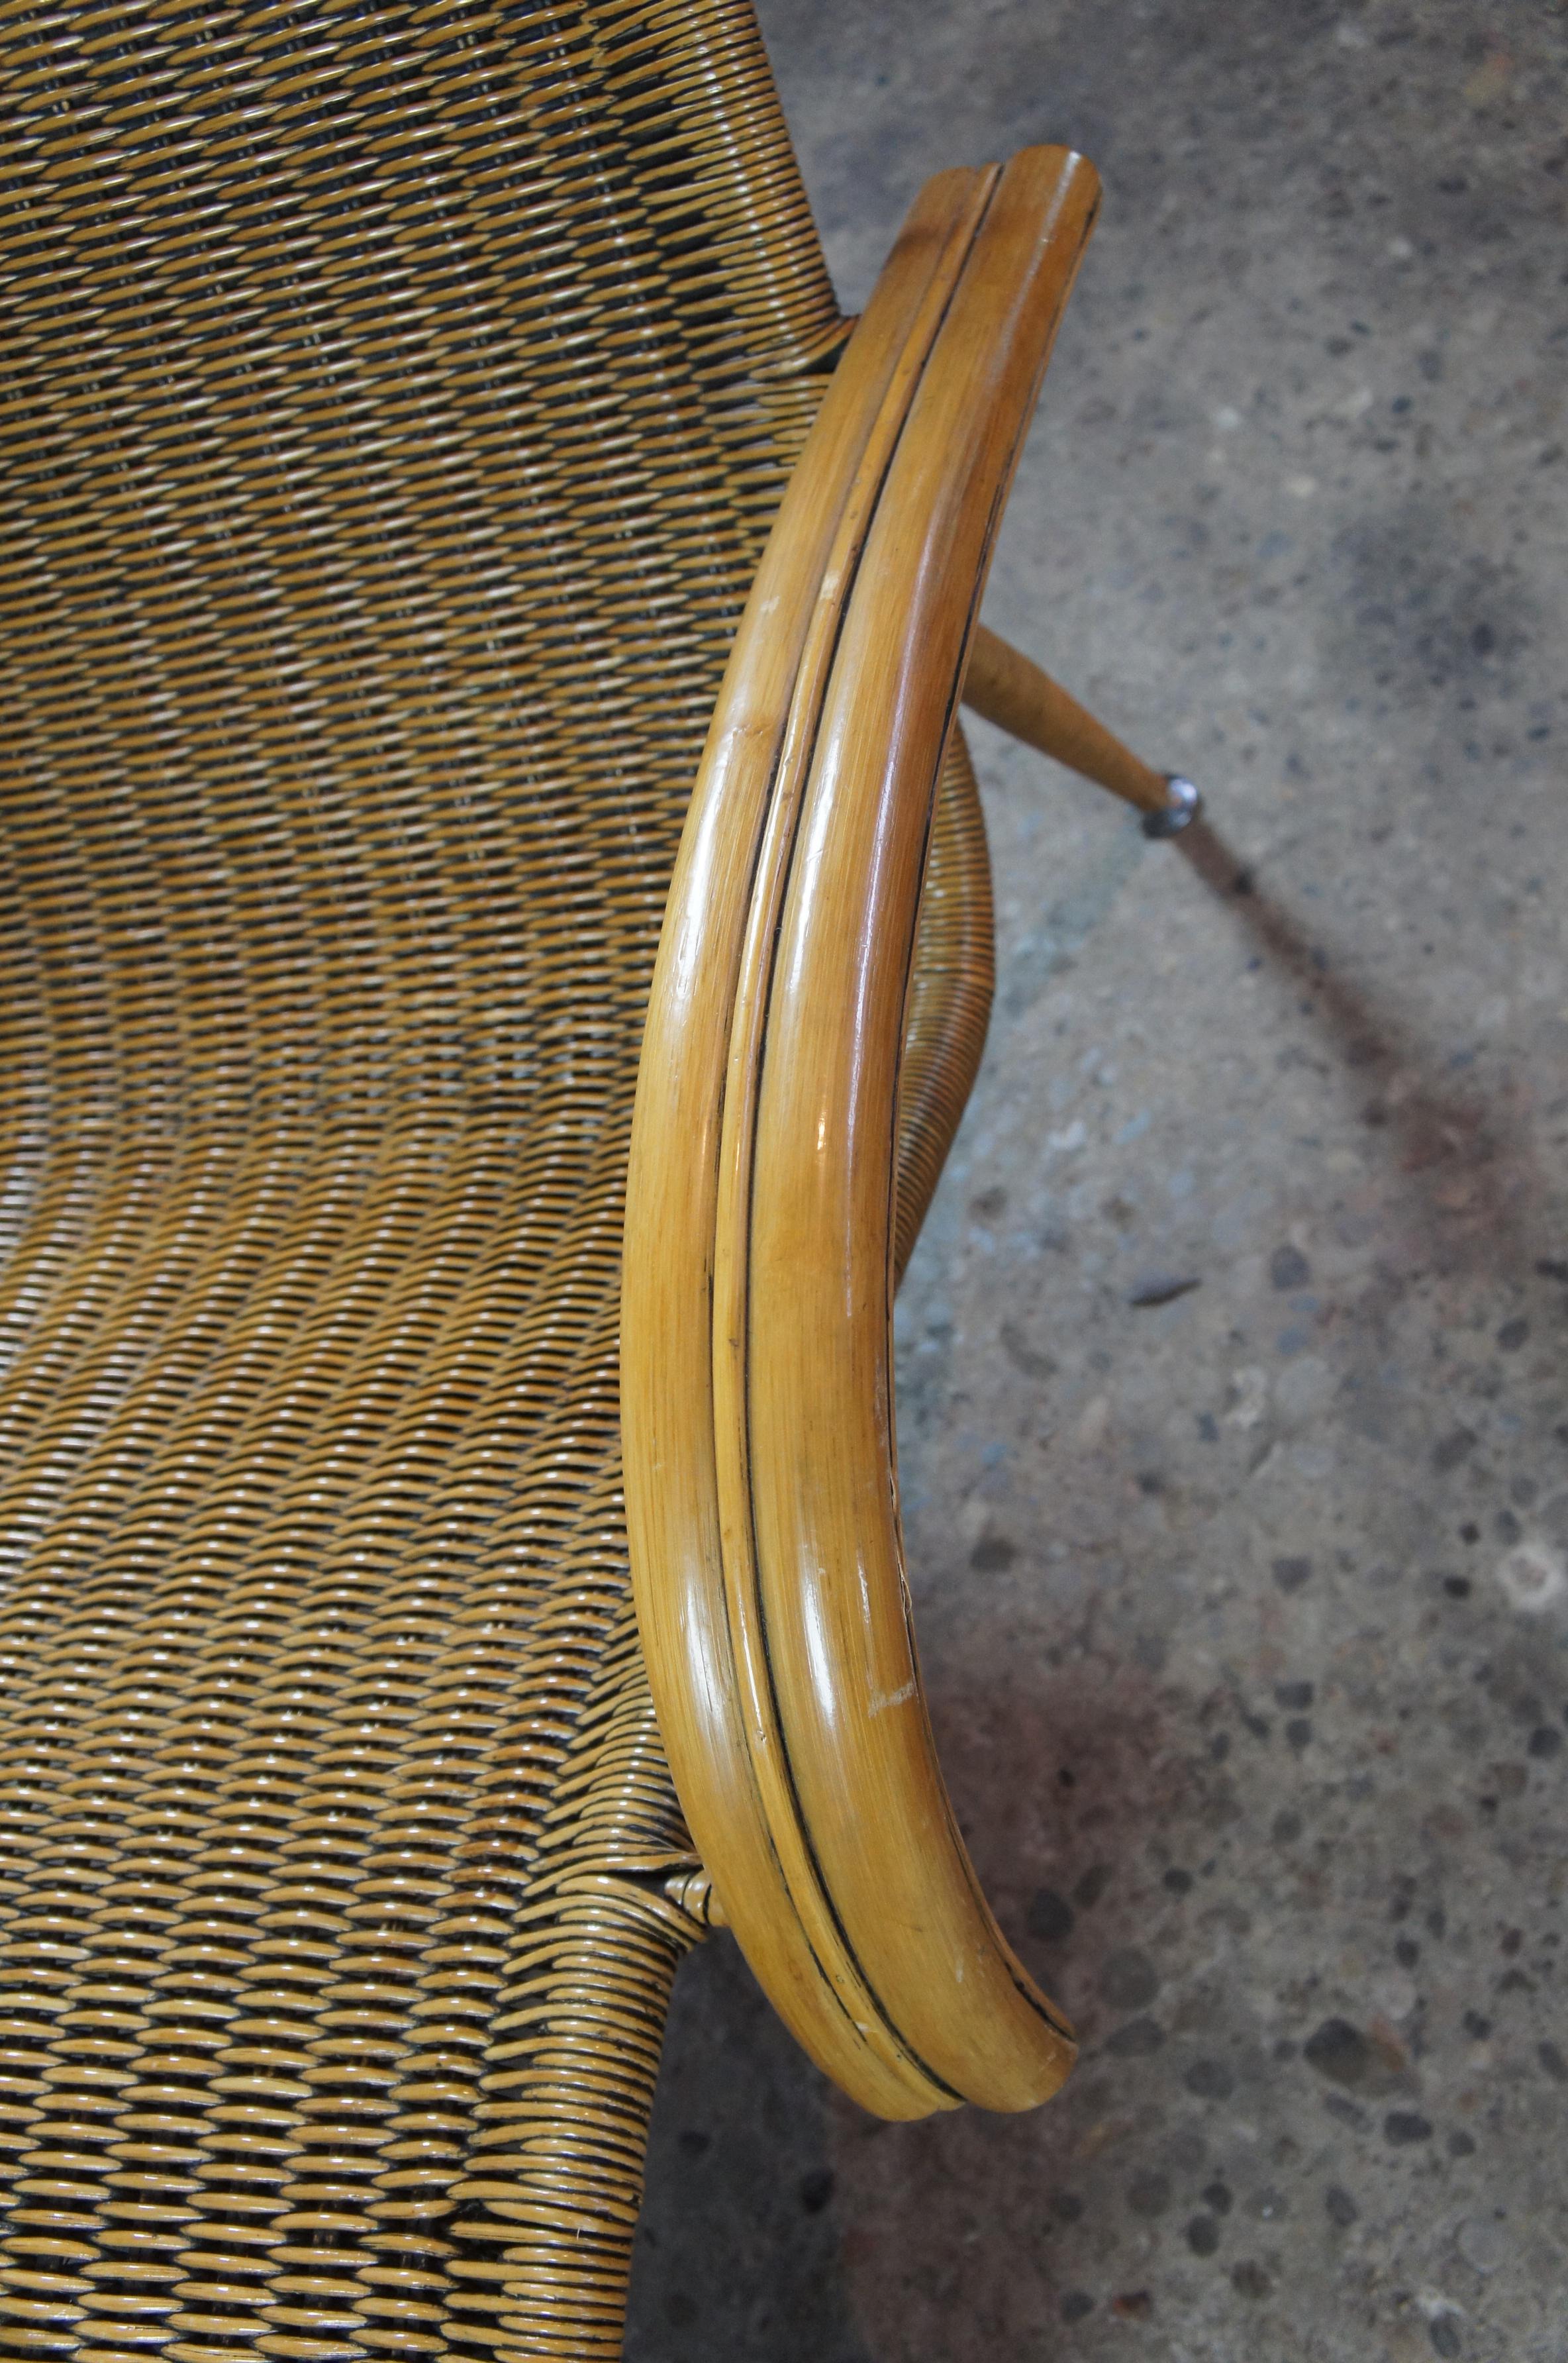 Midcentury Sculptural Italian Modern Cane and Bamboo Chaise Lounge Patio Chair 2